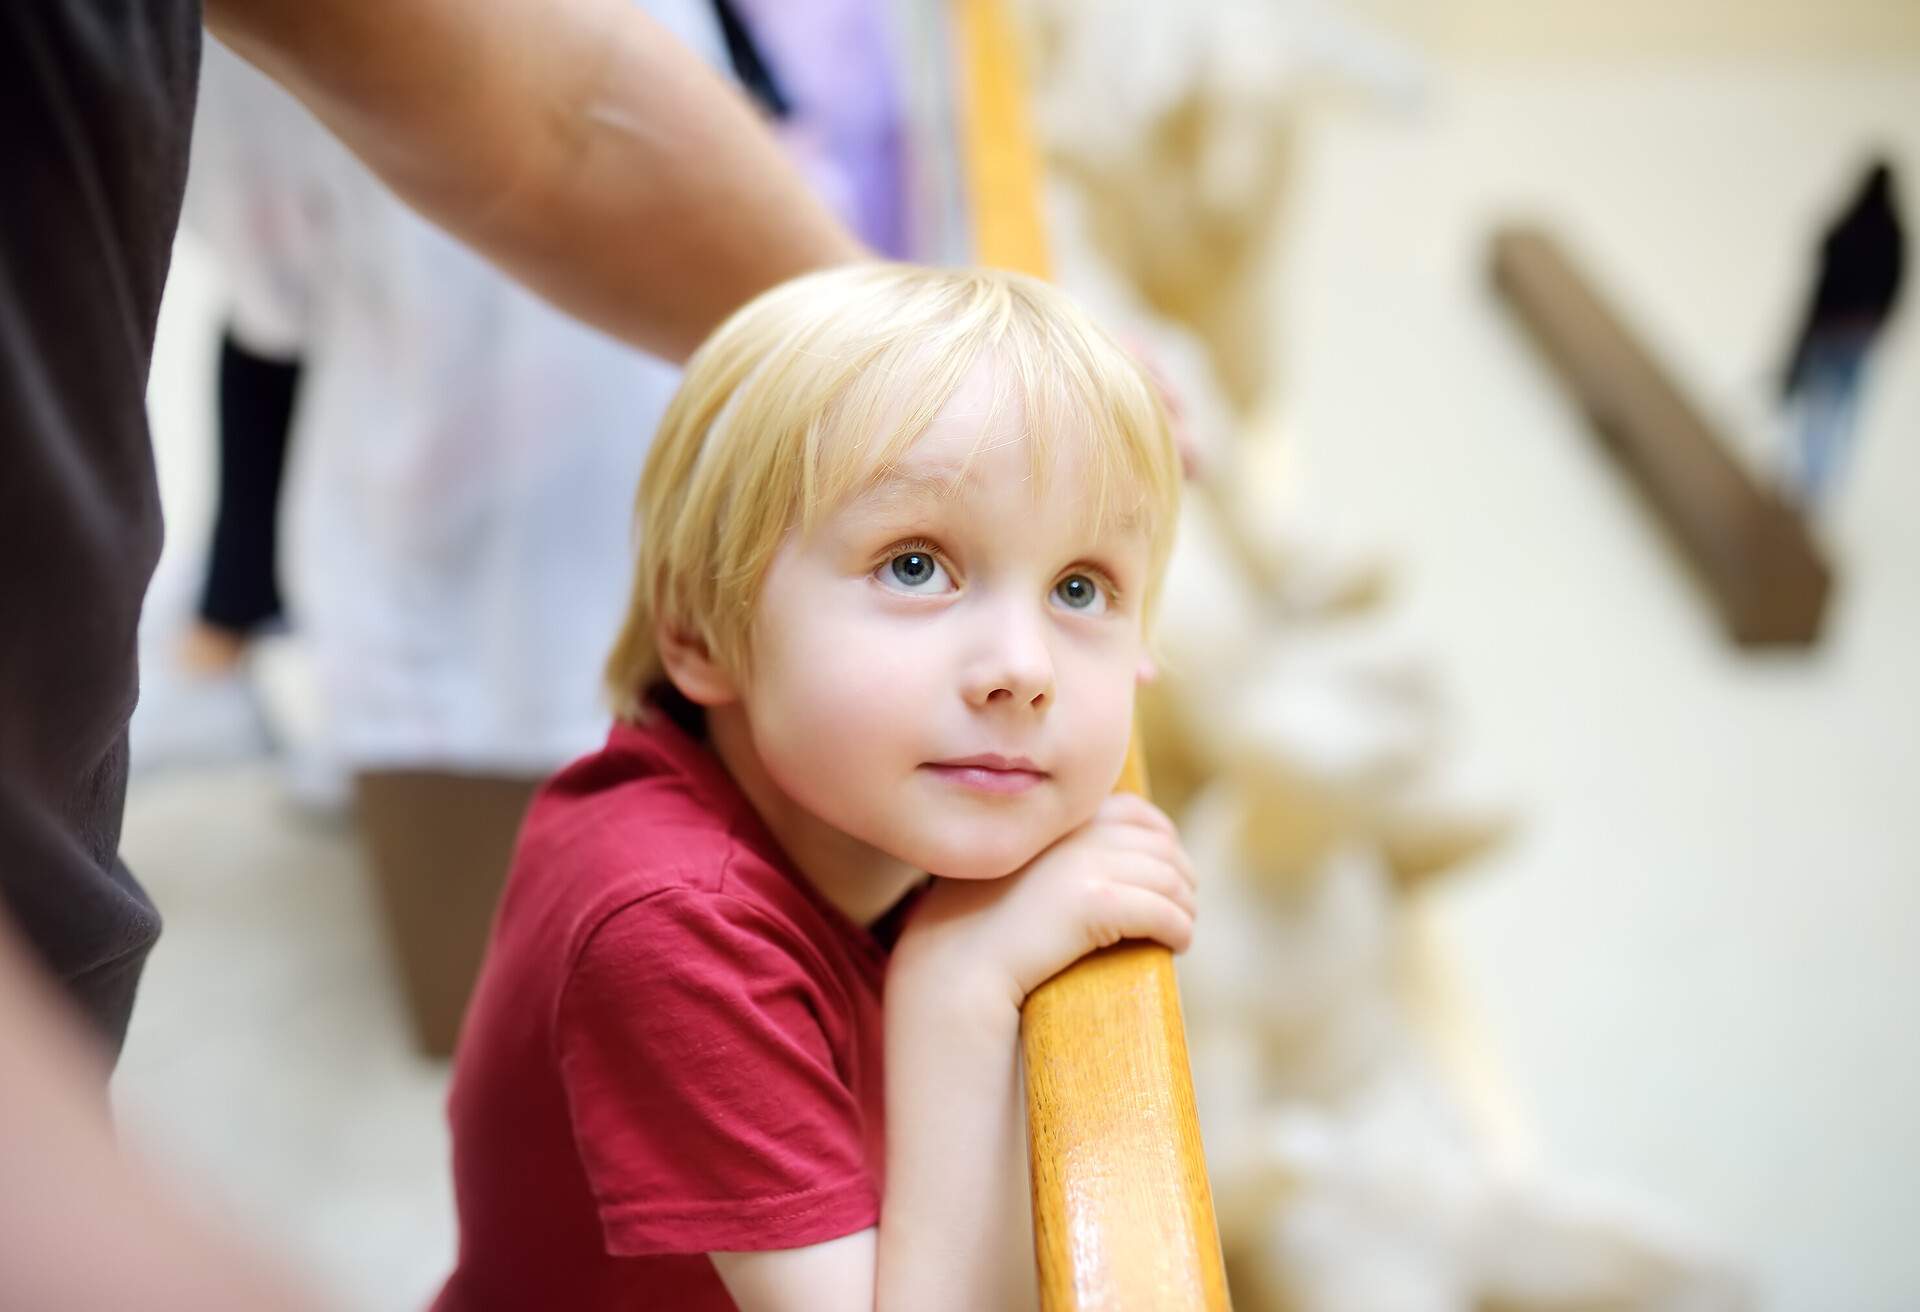 A young boy leaning on wooden hand rail while gazing upward.